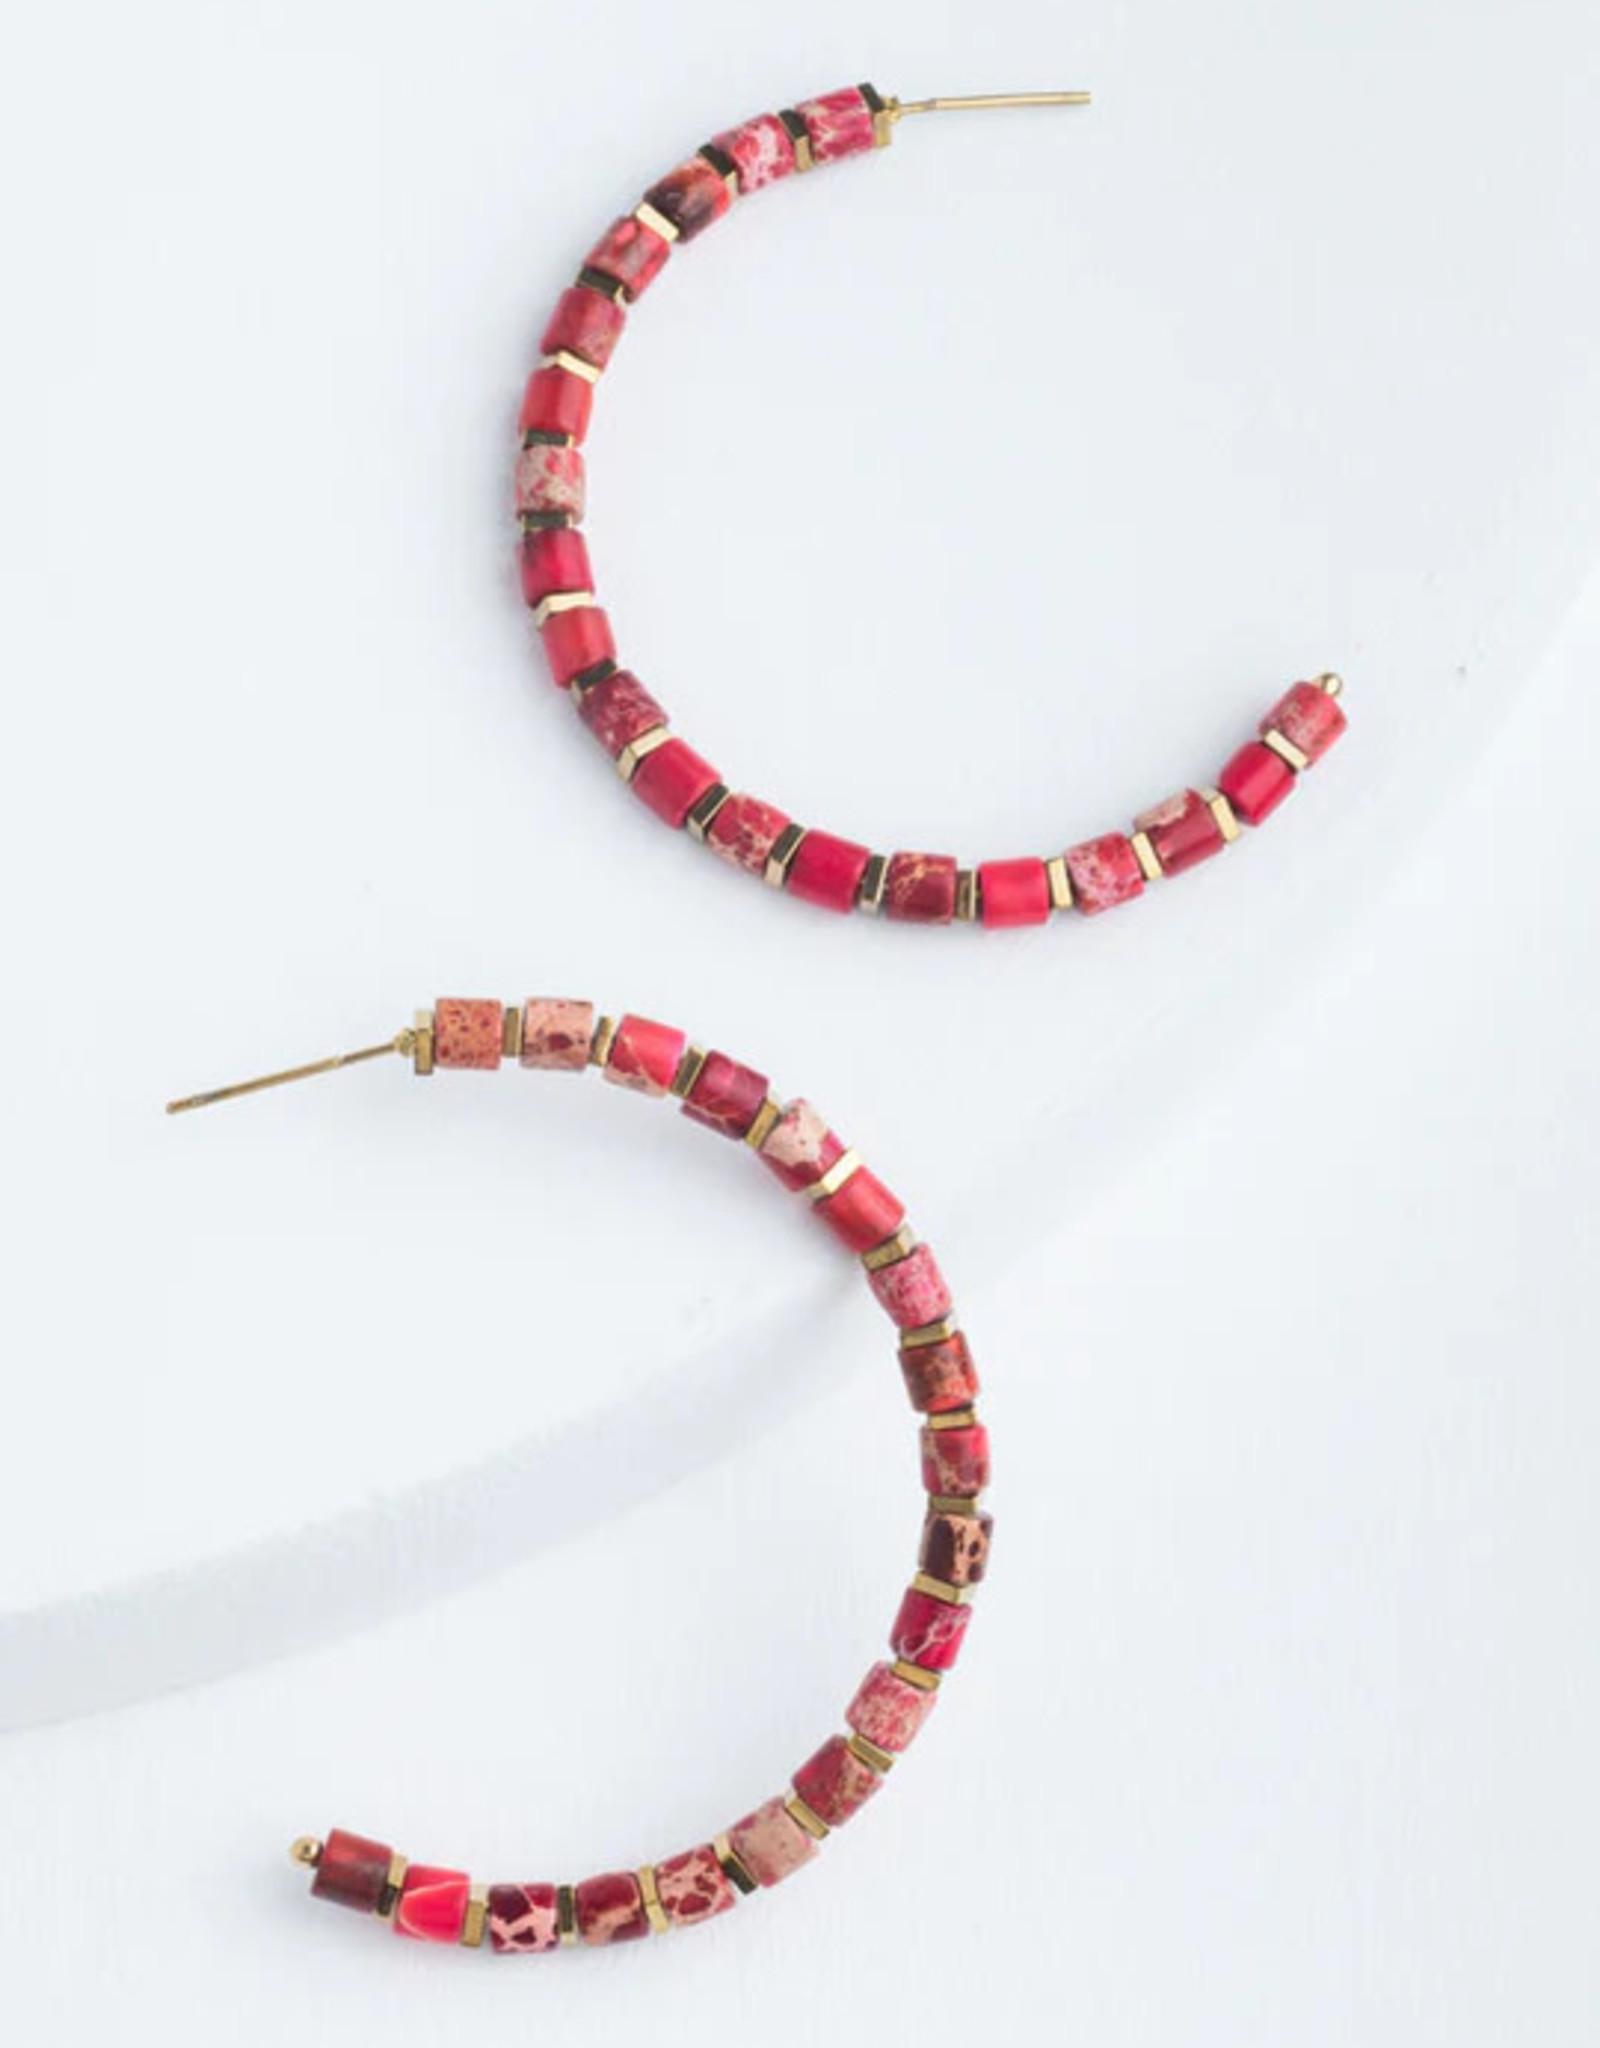 Starfish Project Your New Favorite Hoops in Scarlet